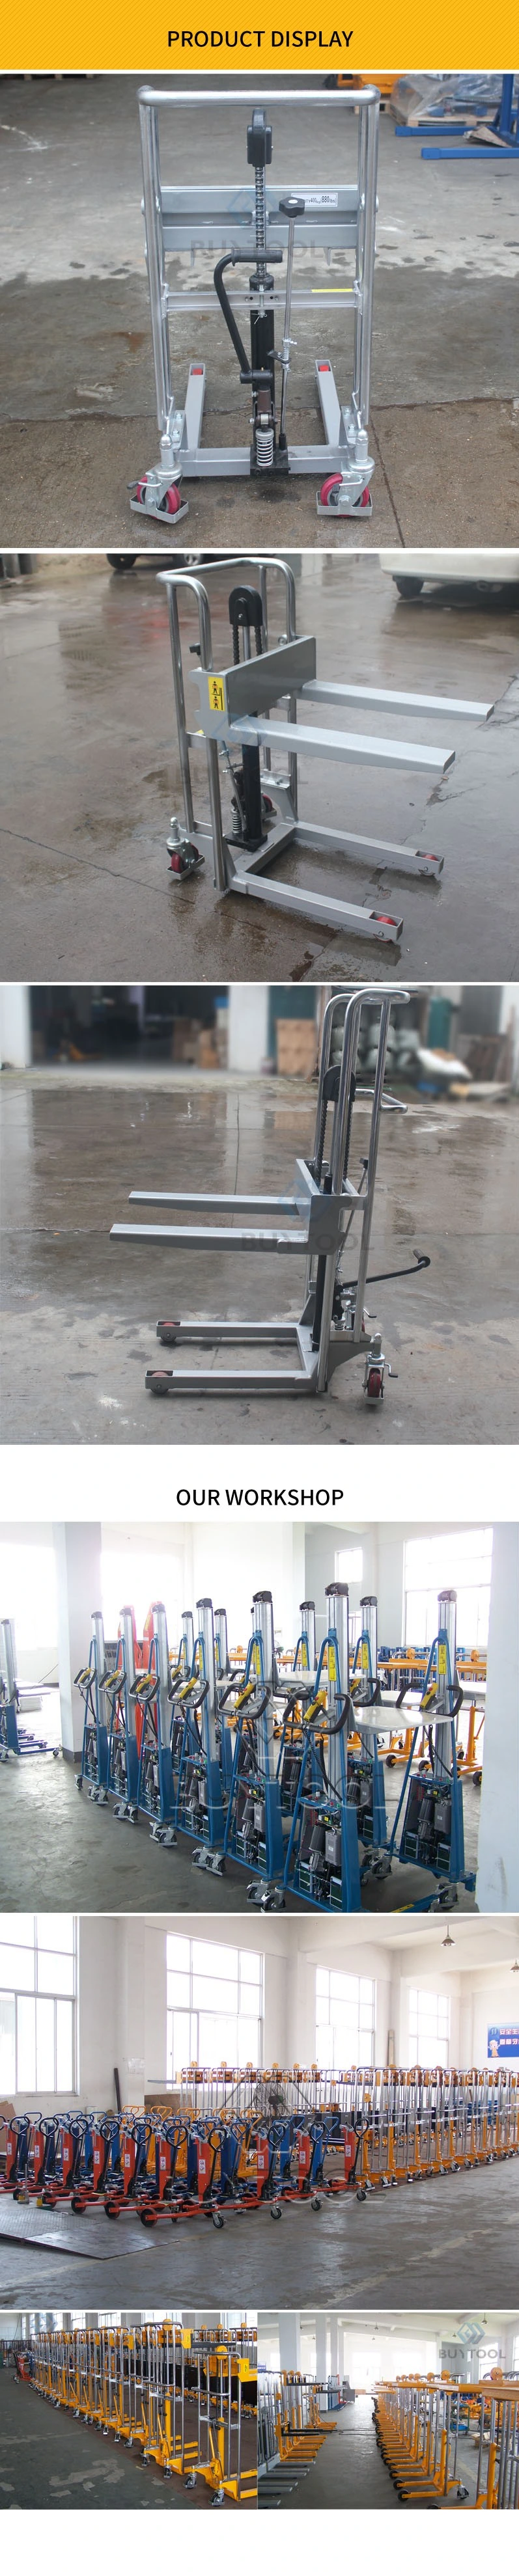 Manual Hand Forklift Stacker with Hydraulic Jack High Lift Forklift in Low Price.